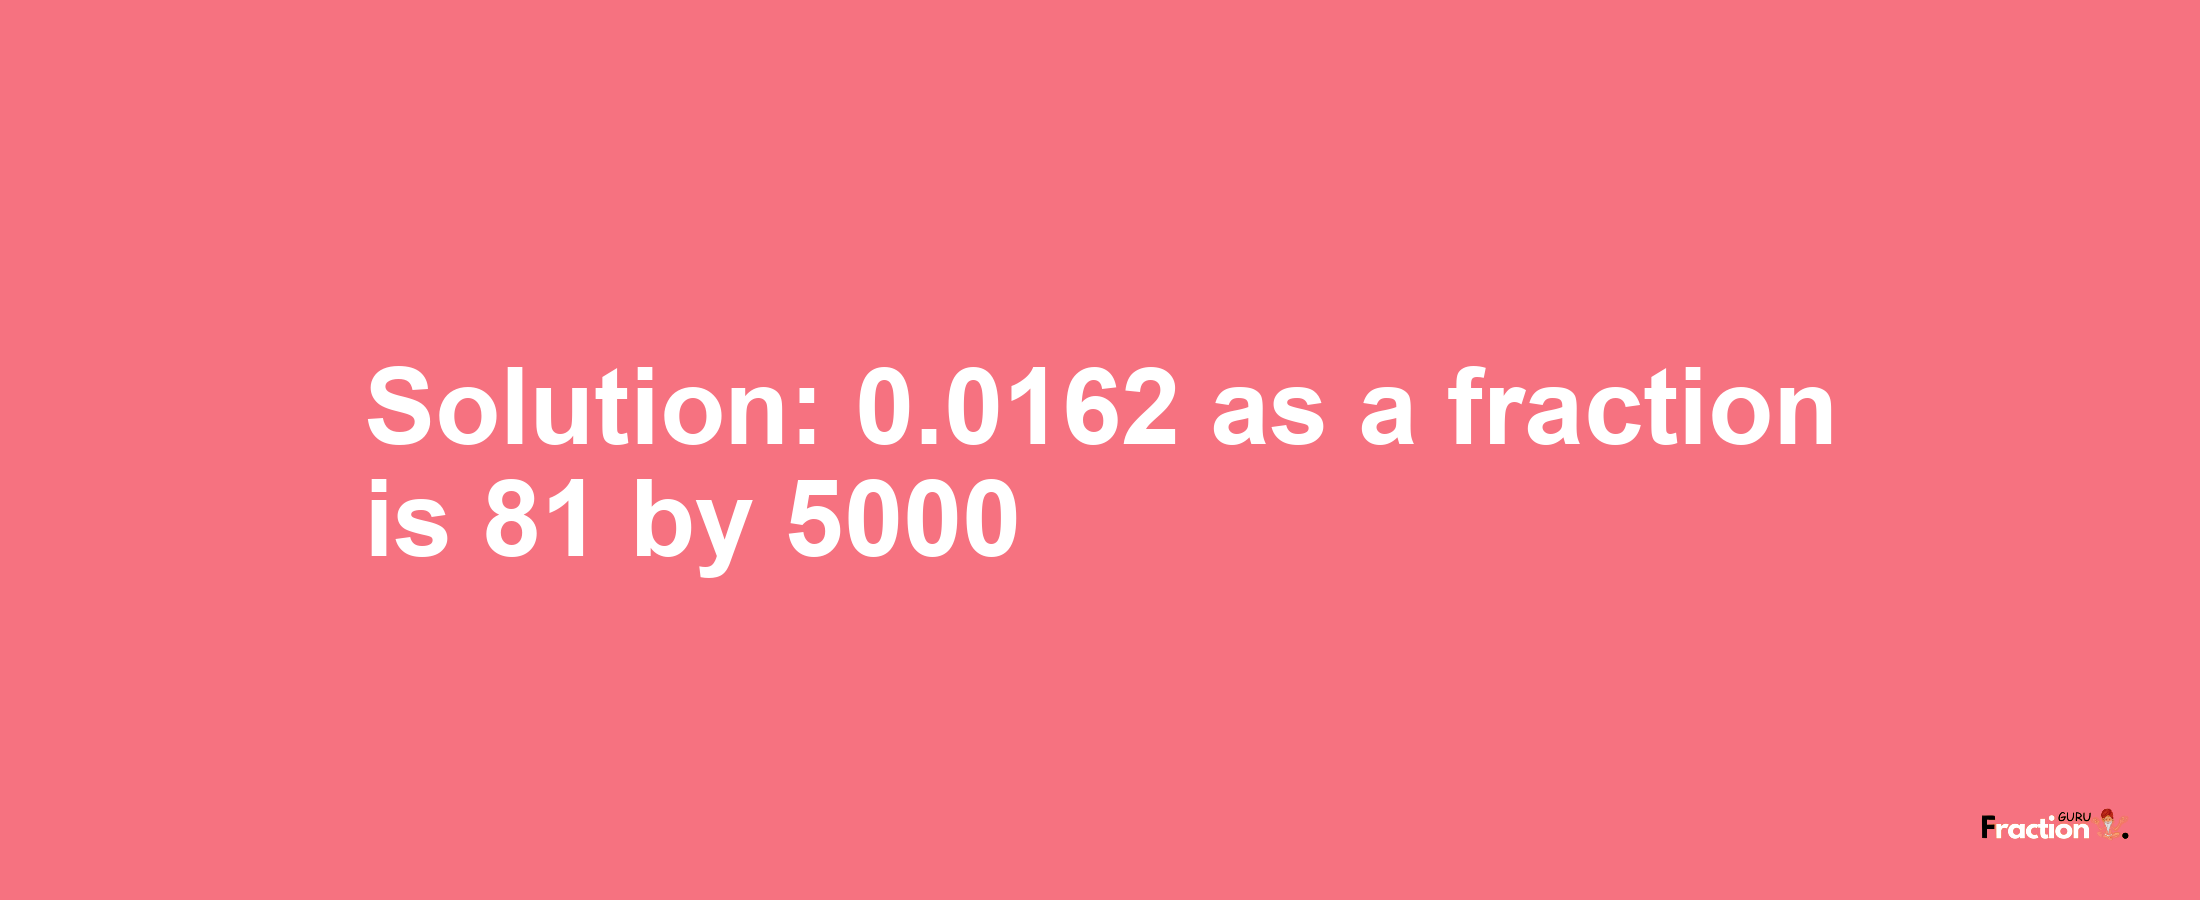 Solution:0.0162 as a fraction is 81/5000